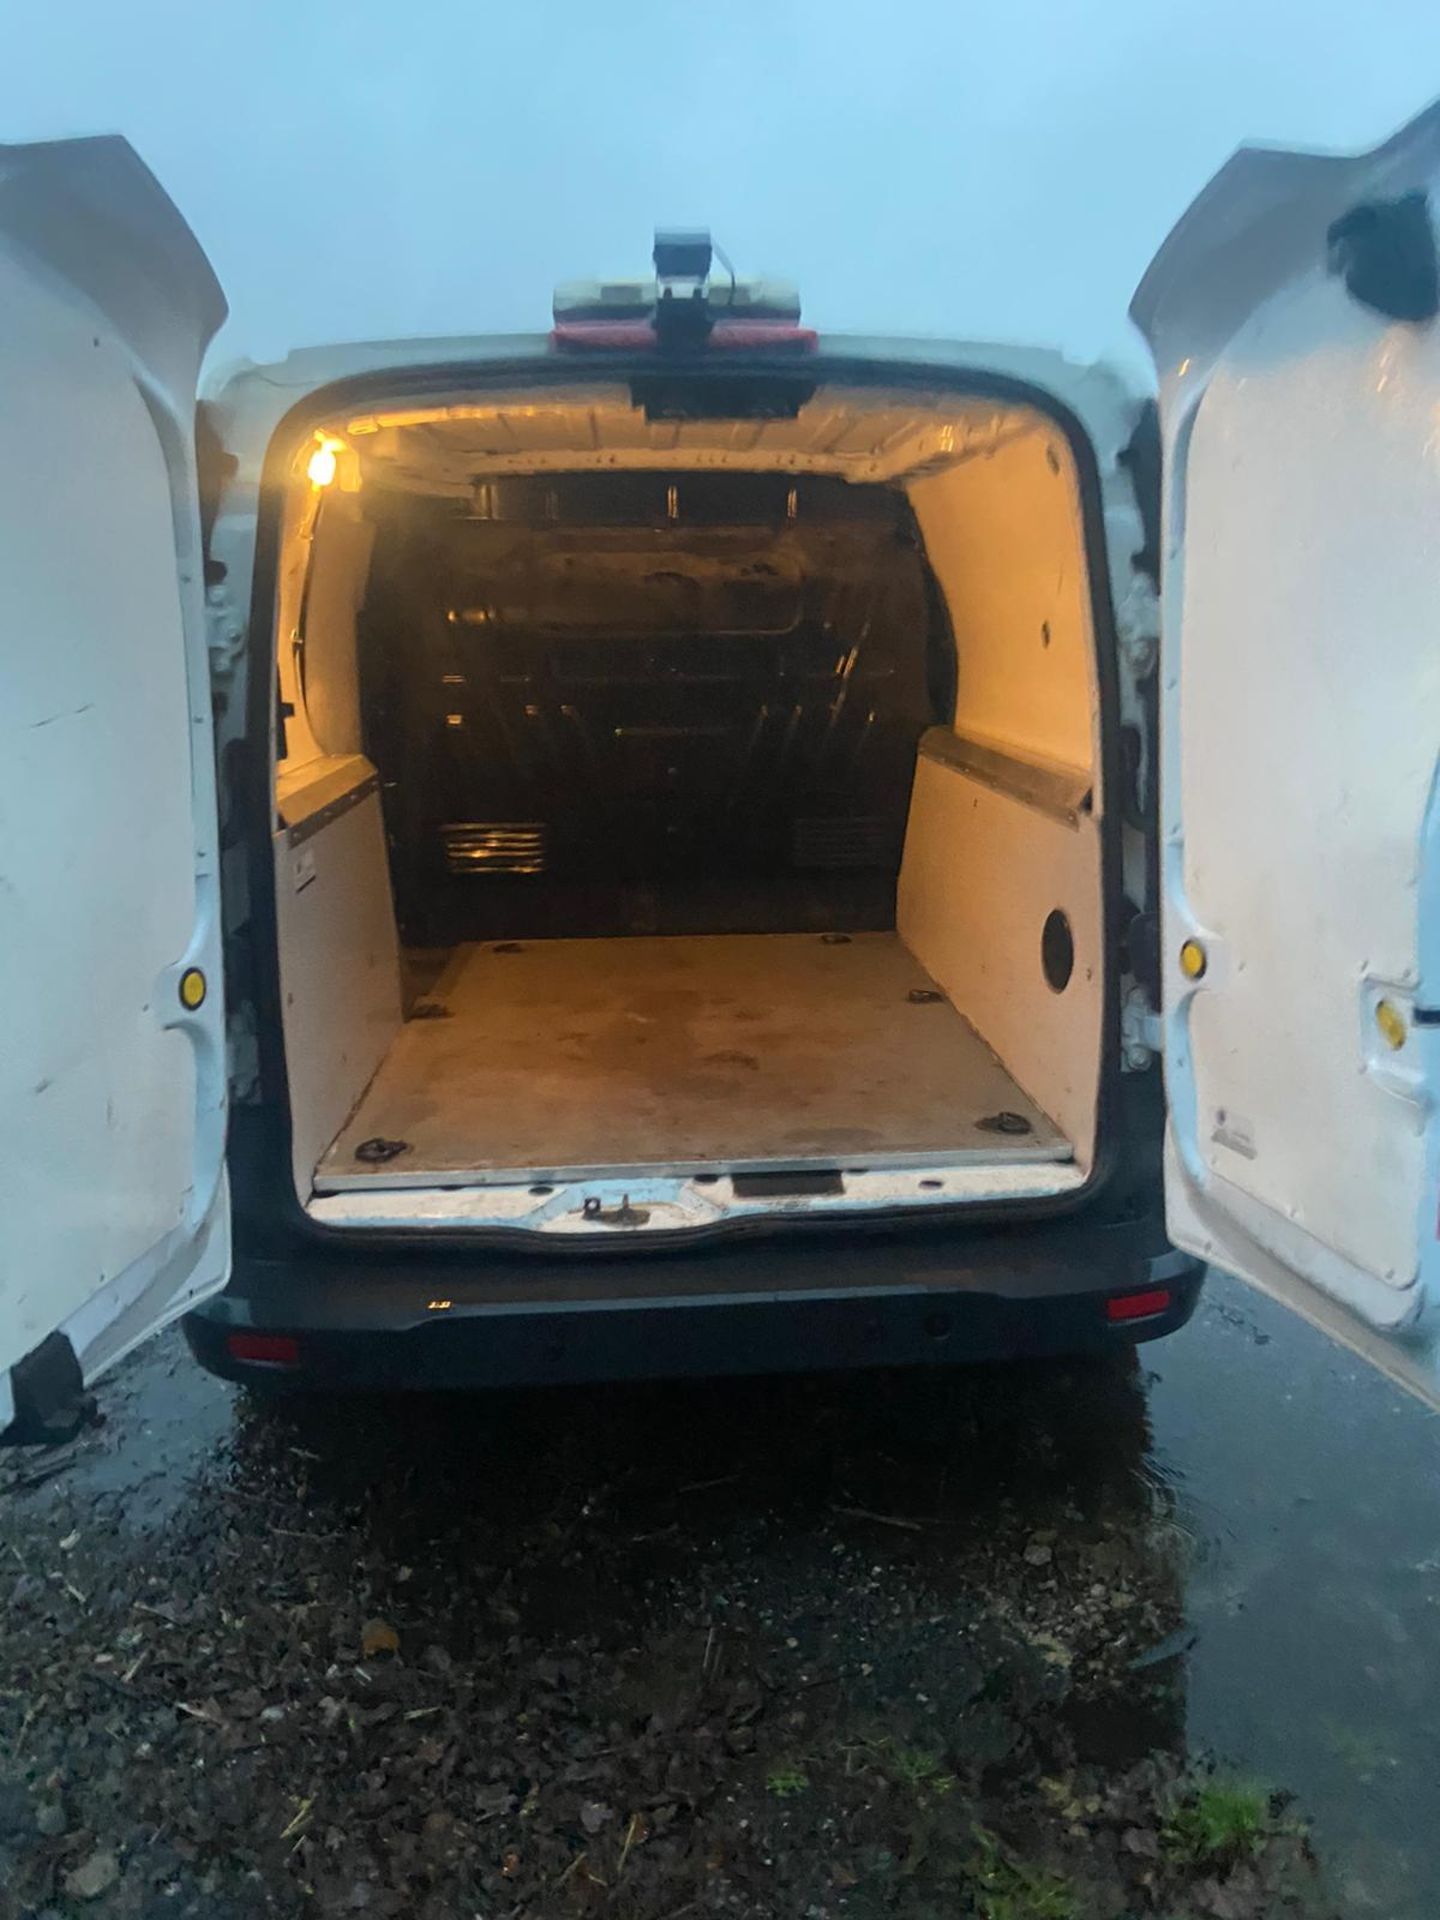 2015/15 REG FORD TRANSIT CONNECT 200 ECONETIC 1.6 DIESEL WHITE PANEL VAN, SHOWING 0 FORMER KEEPERS - Image 7 of 9